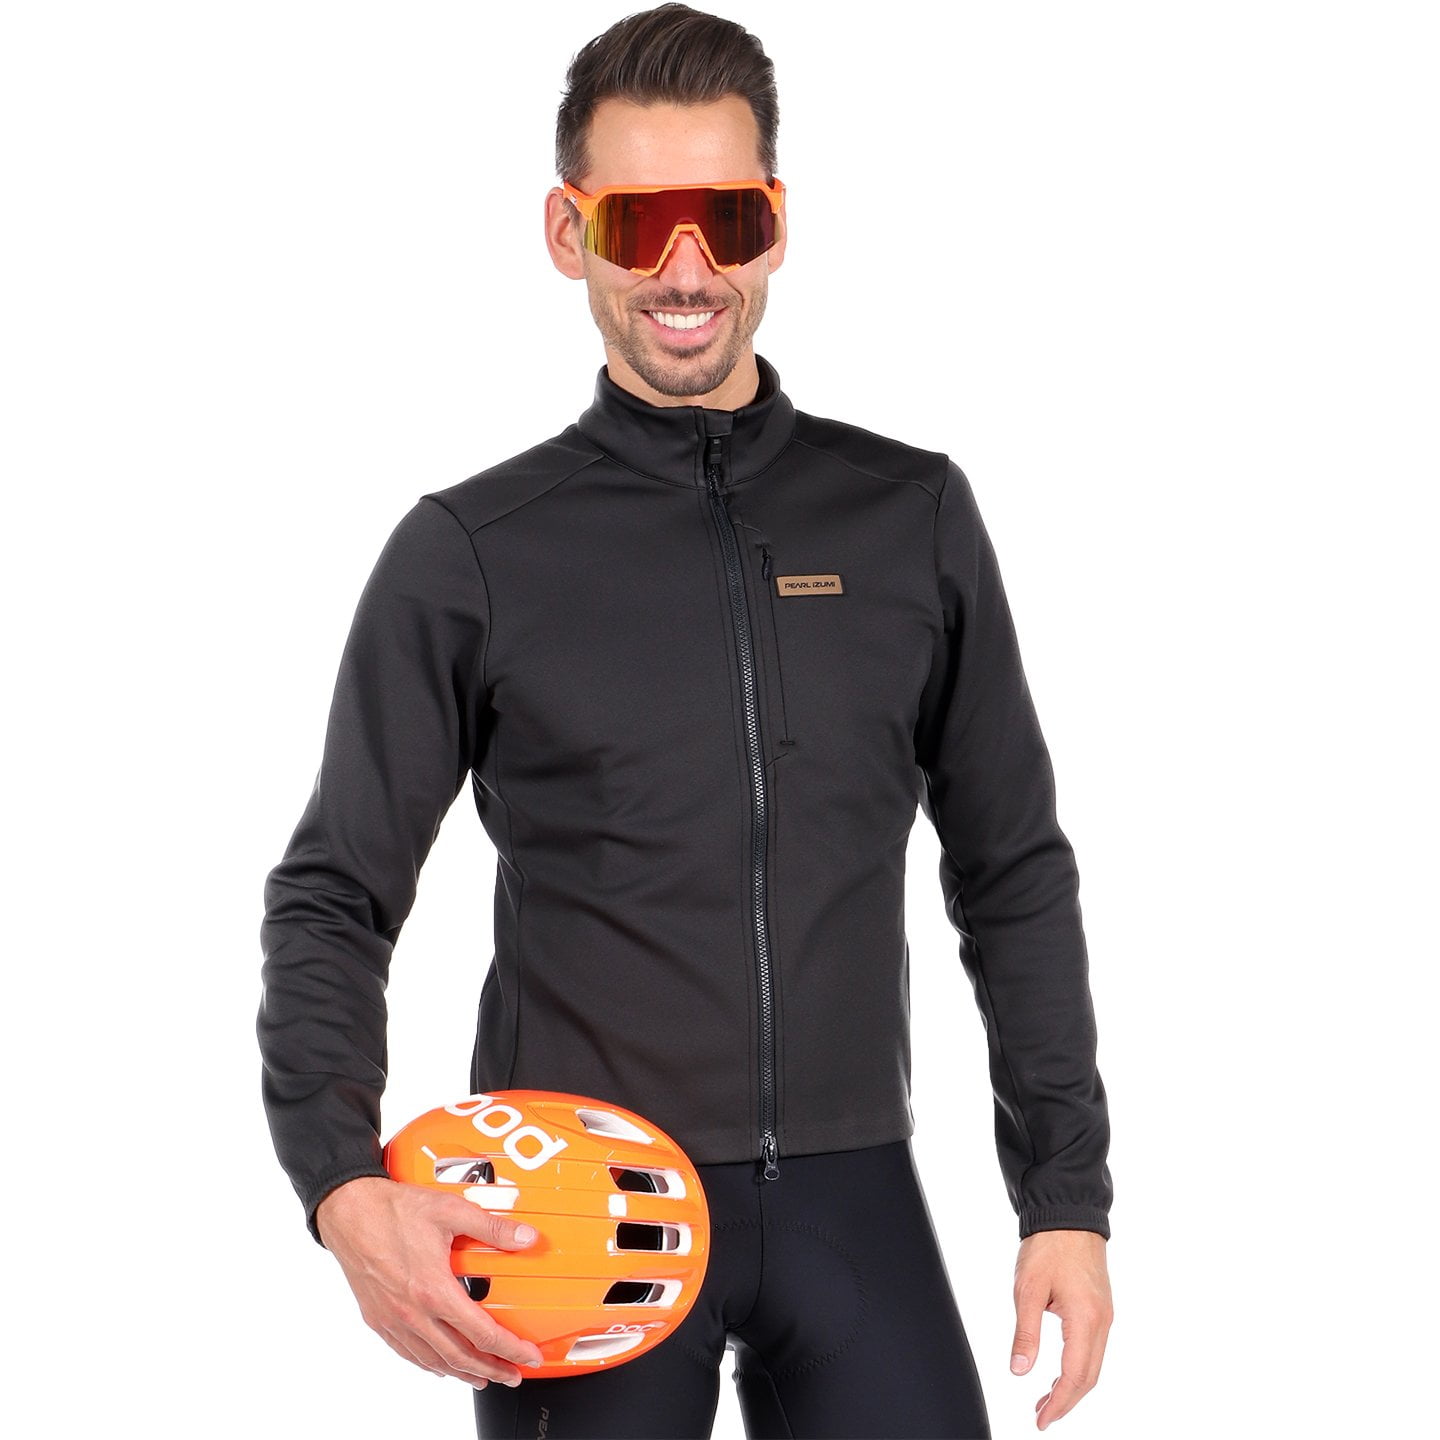 PEARL IZUMI AmFIB Lite Winter Jacket Thermal Jacket, for men, size XL, Cycle jacket, Cycle gear